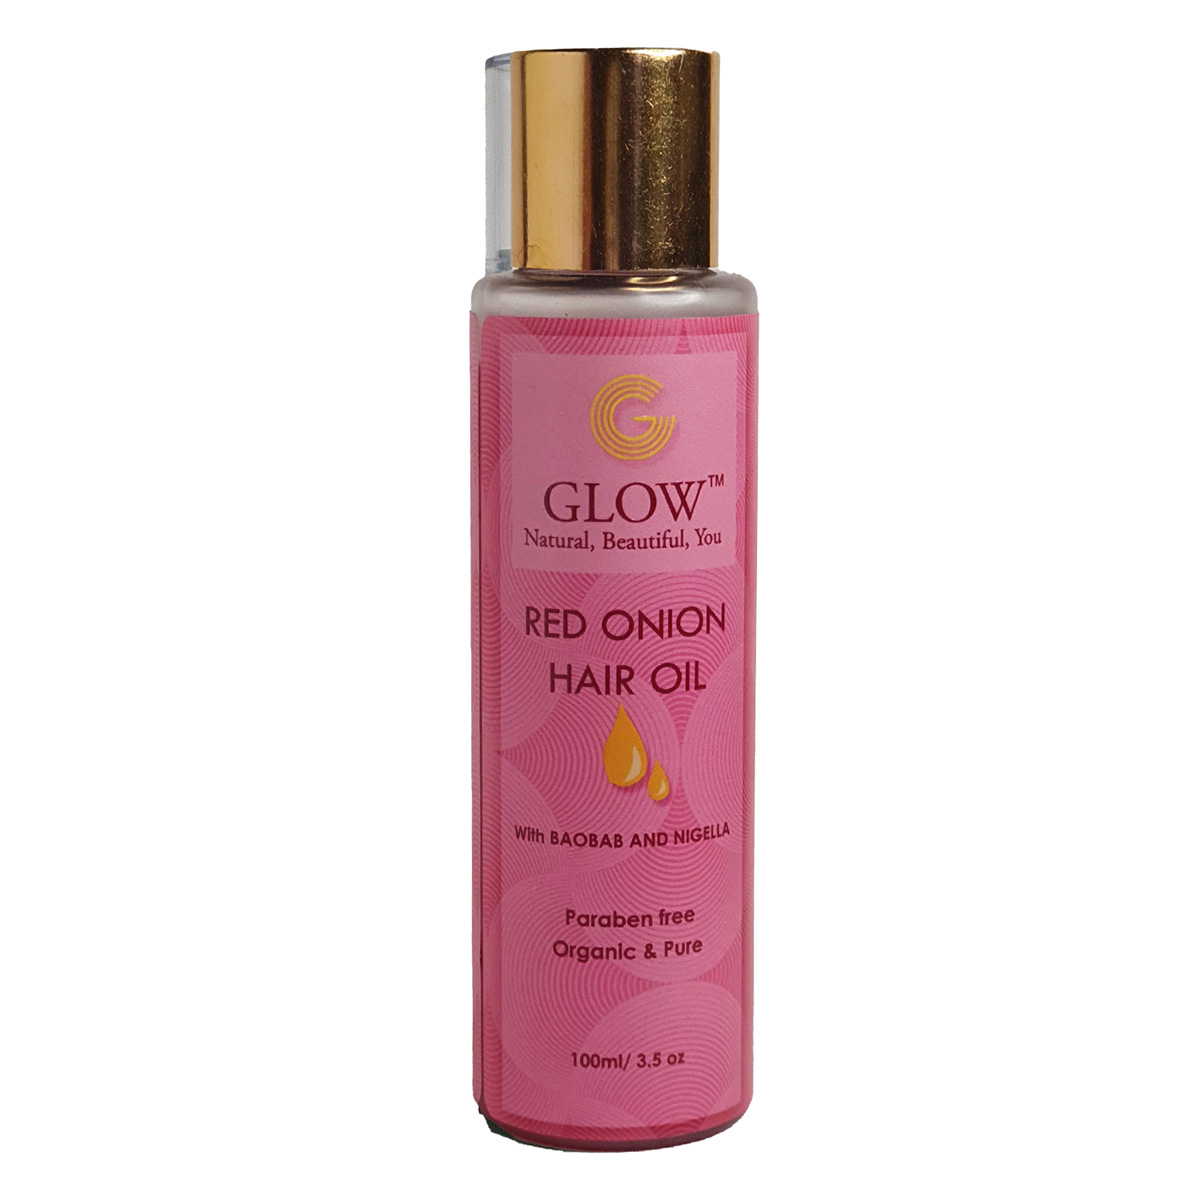 Glow-NBY Red Onion Hair Oil Made With Baobab And Nigella, 100ml